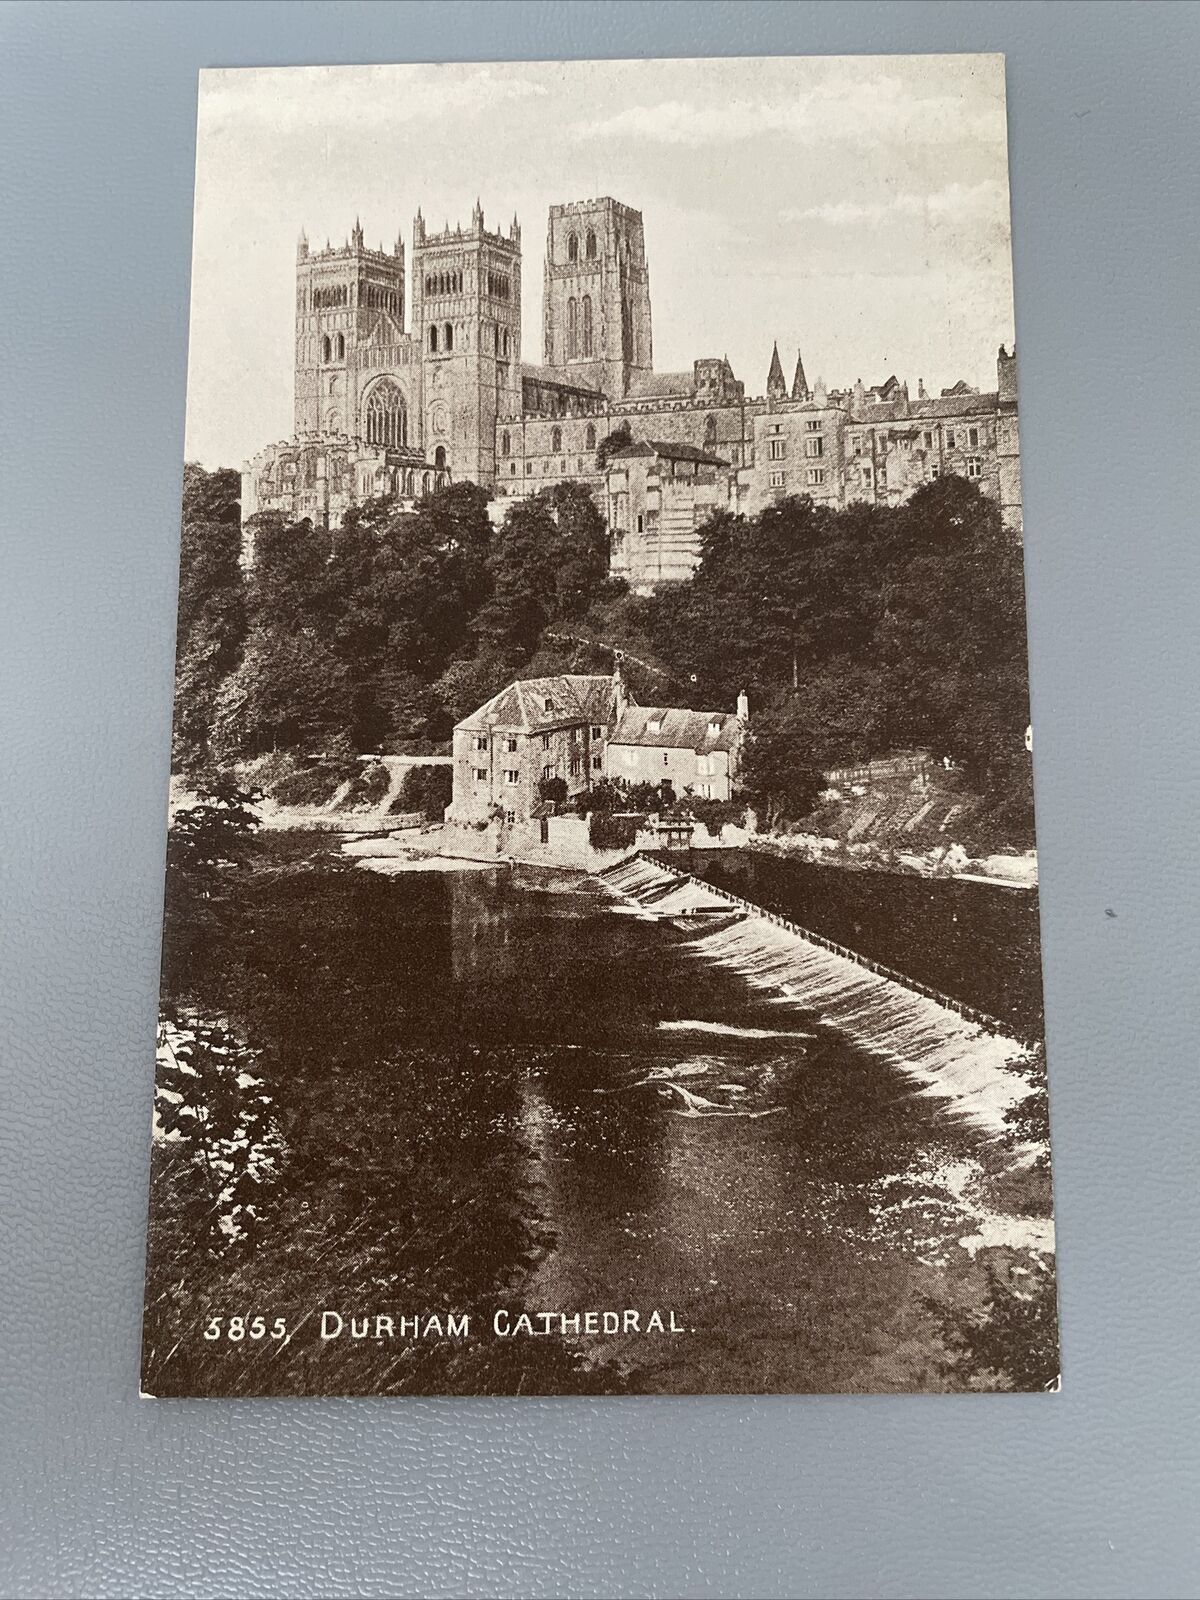 House Clearance - J. Salmon Service, No 5855, Durham Cathedral